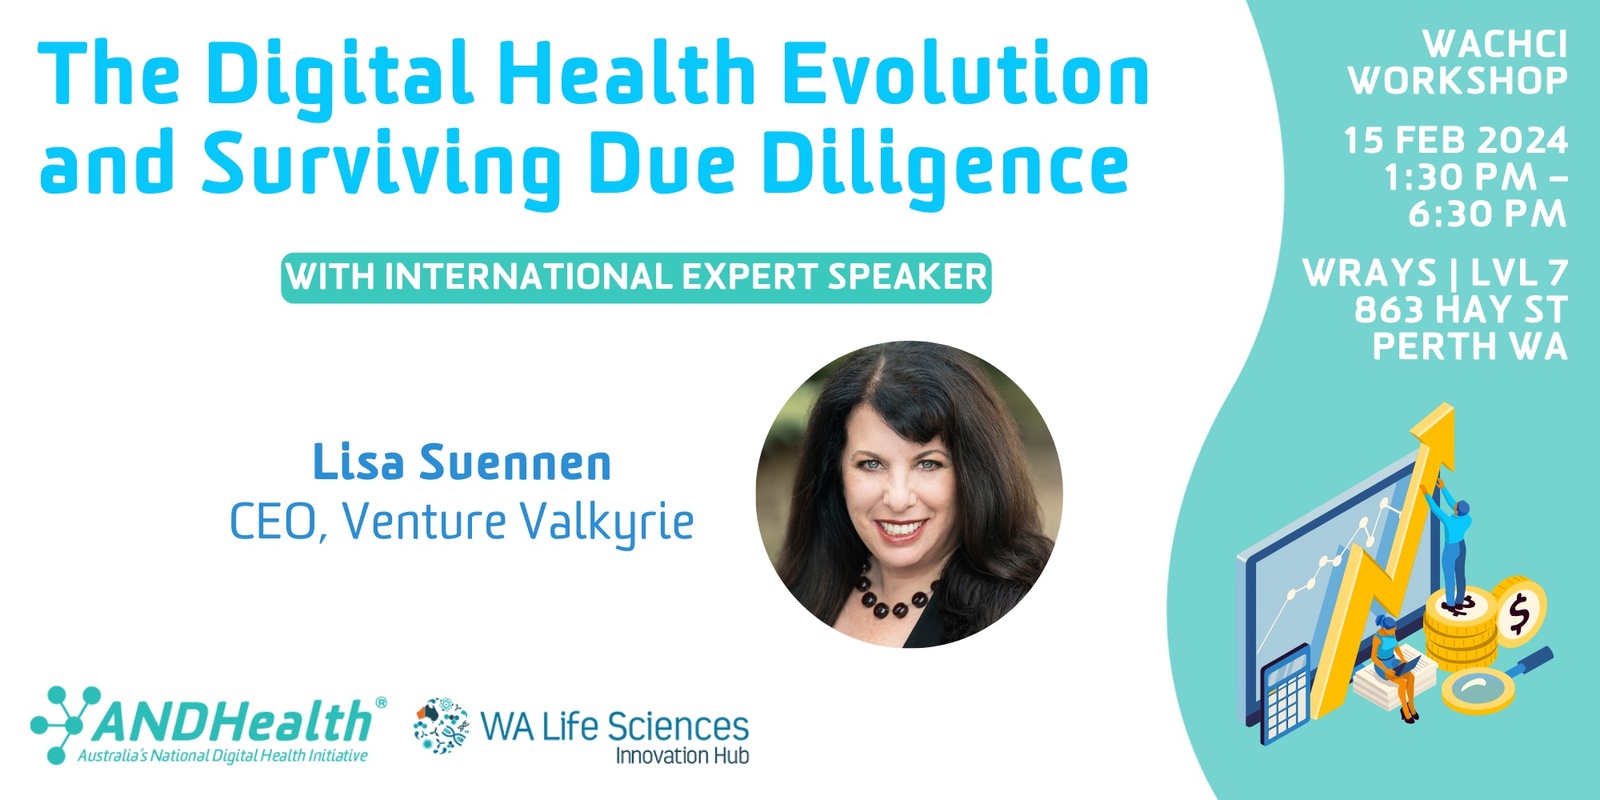 Banner image for The Digital Health Evolution and Surviving Due Diligence with Lisa Suennen